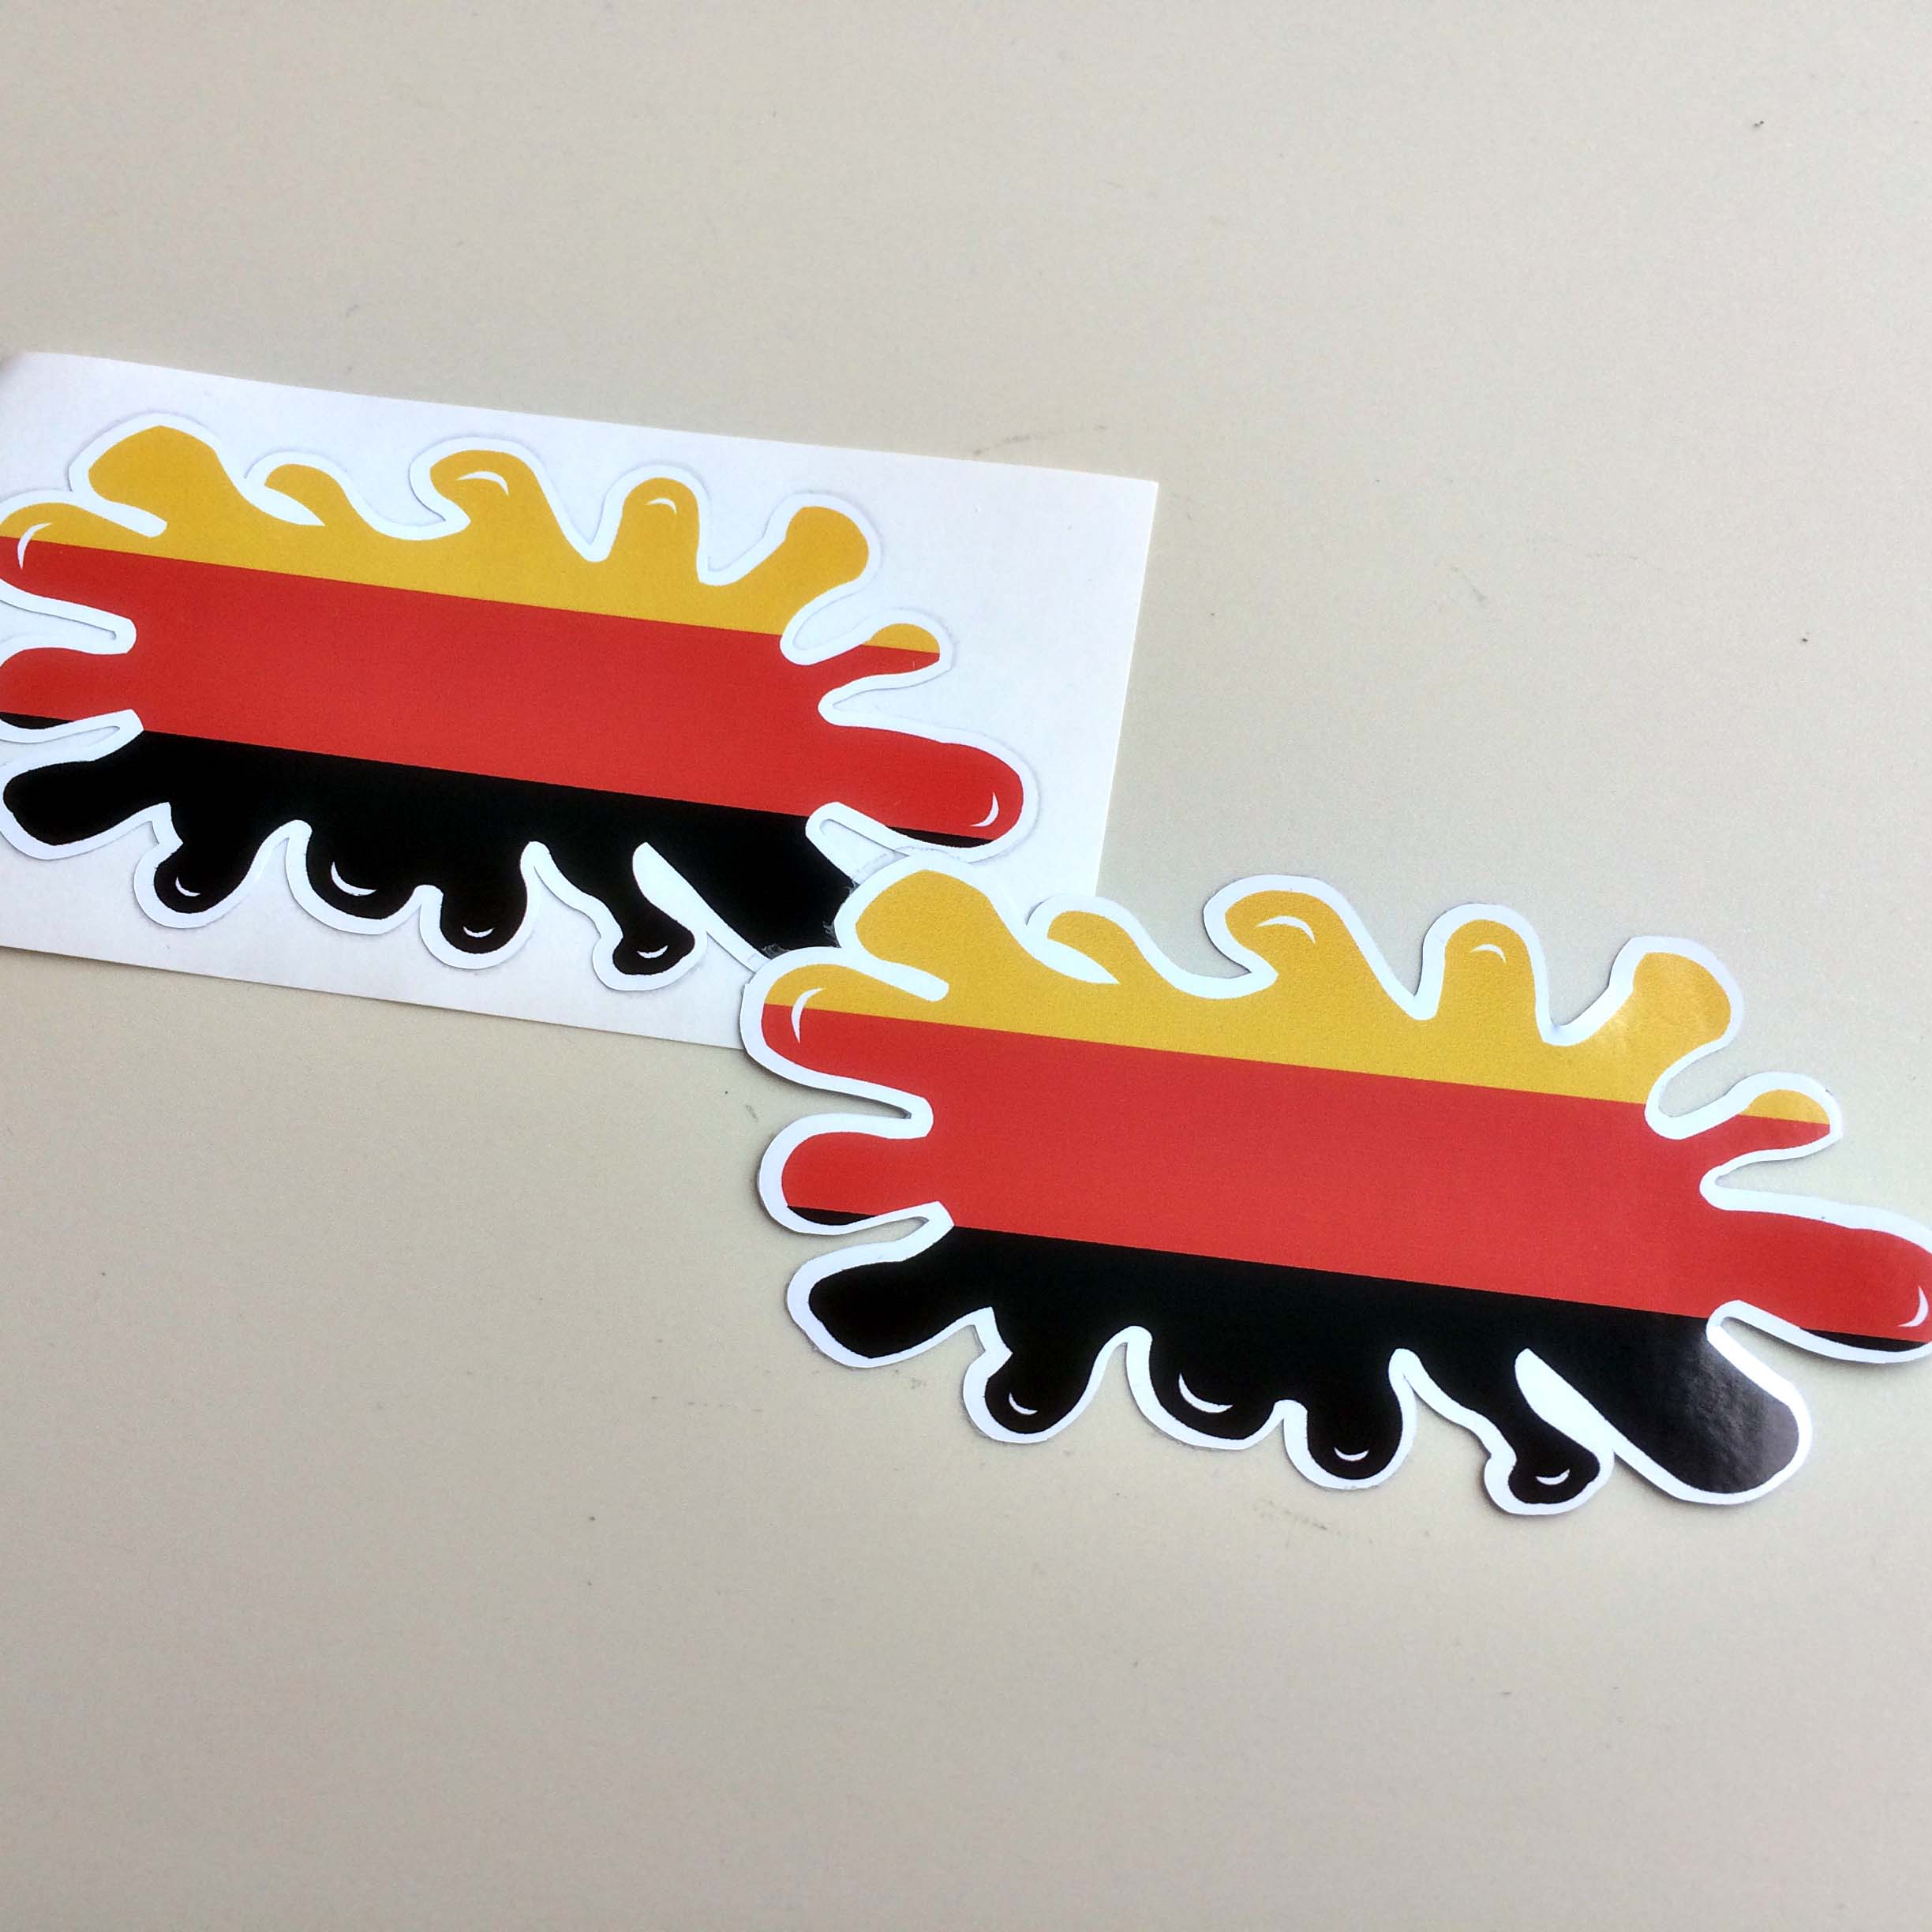 GERMAN GERMANY FLAG SPLAT STICKERS. The German flag. A tricolour of gold, red and black horizontal stripes in the shape of a paint splat.